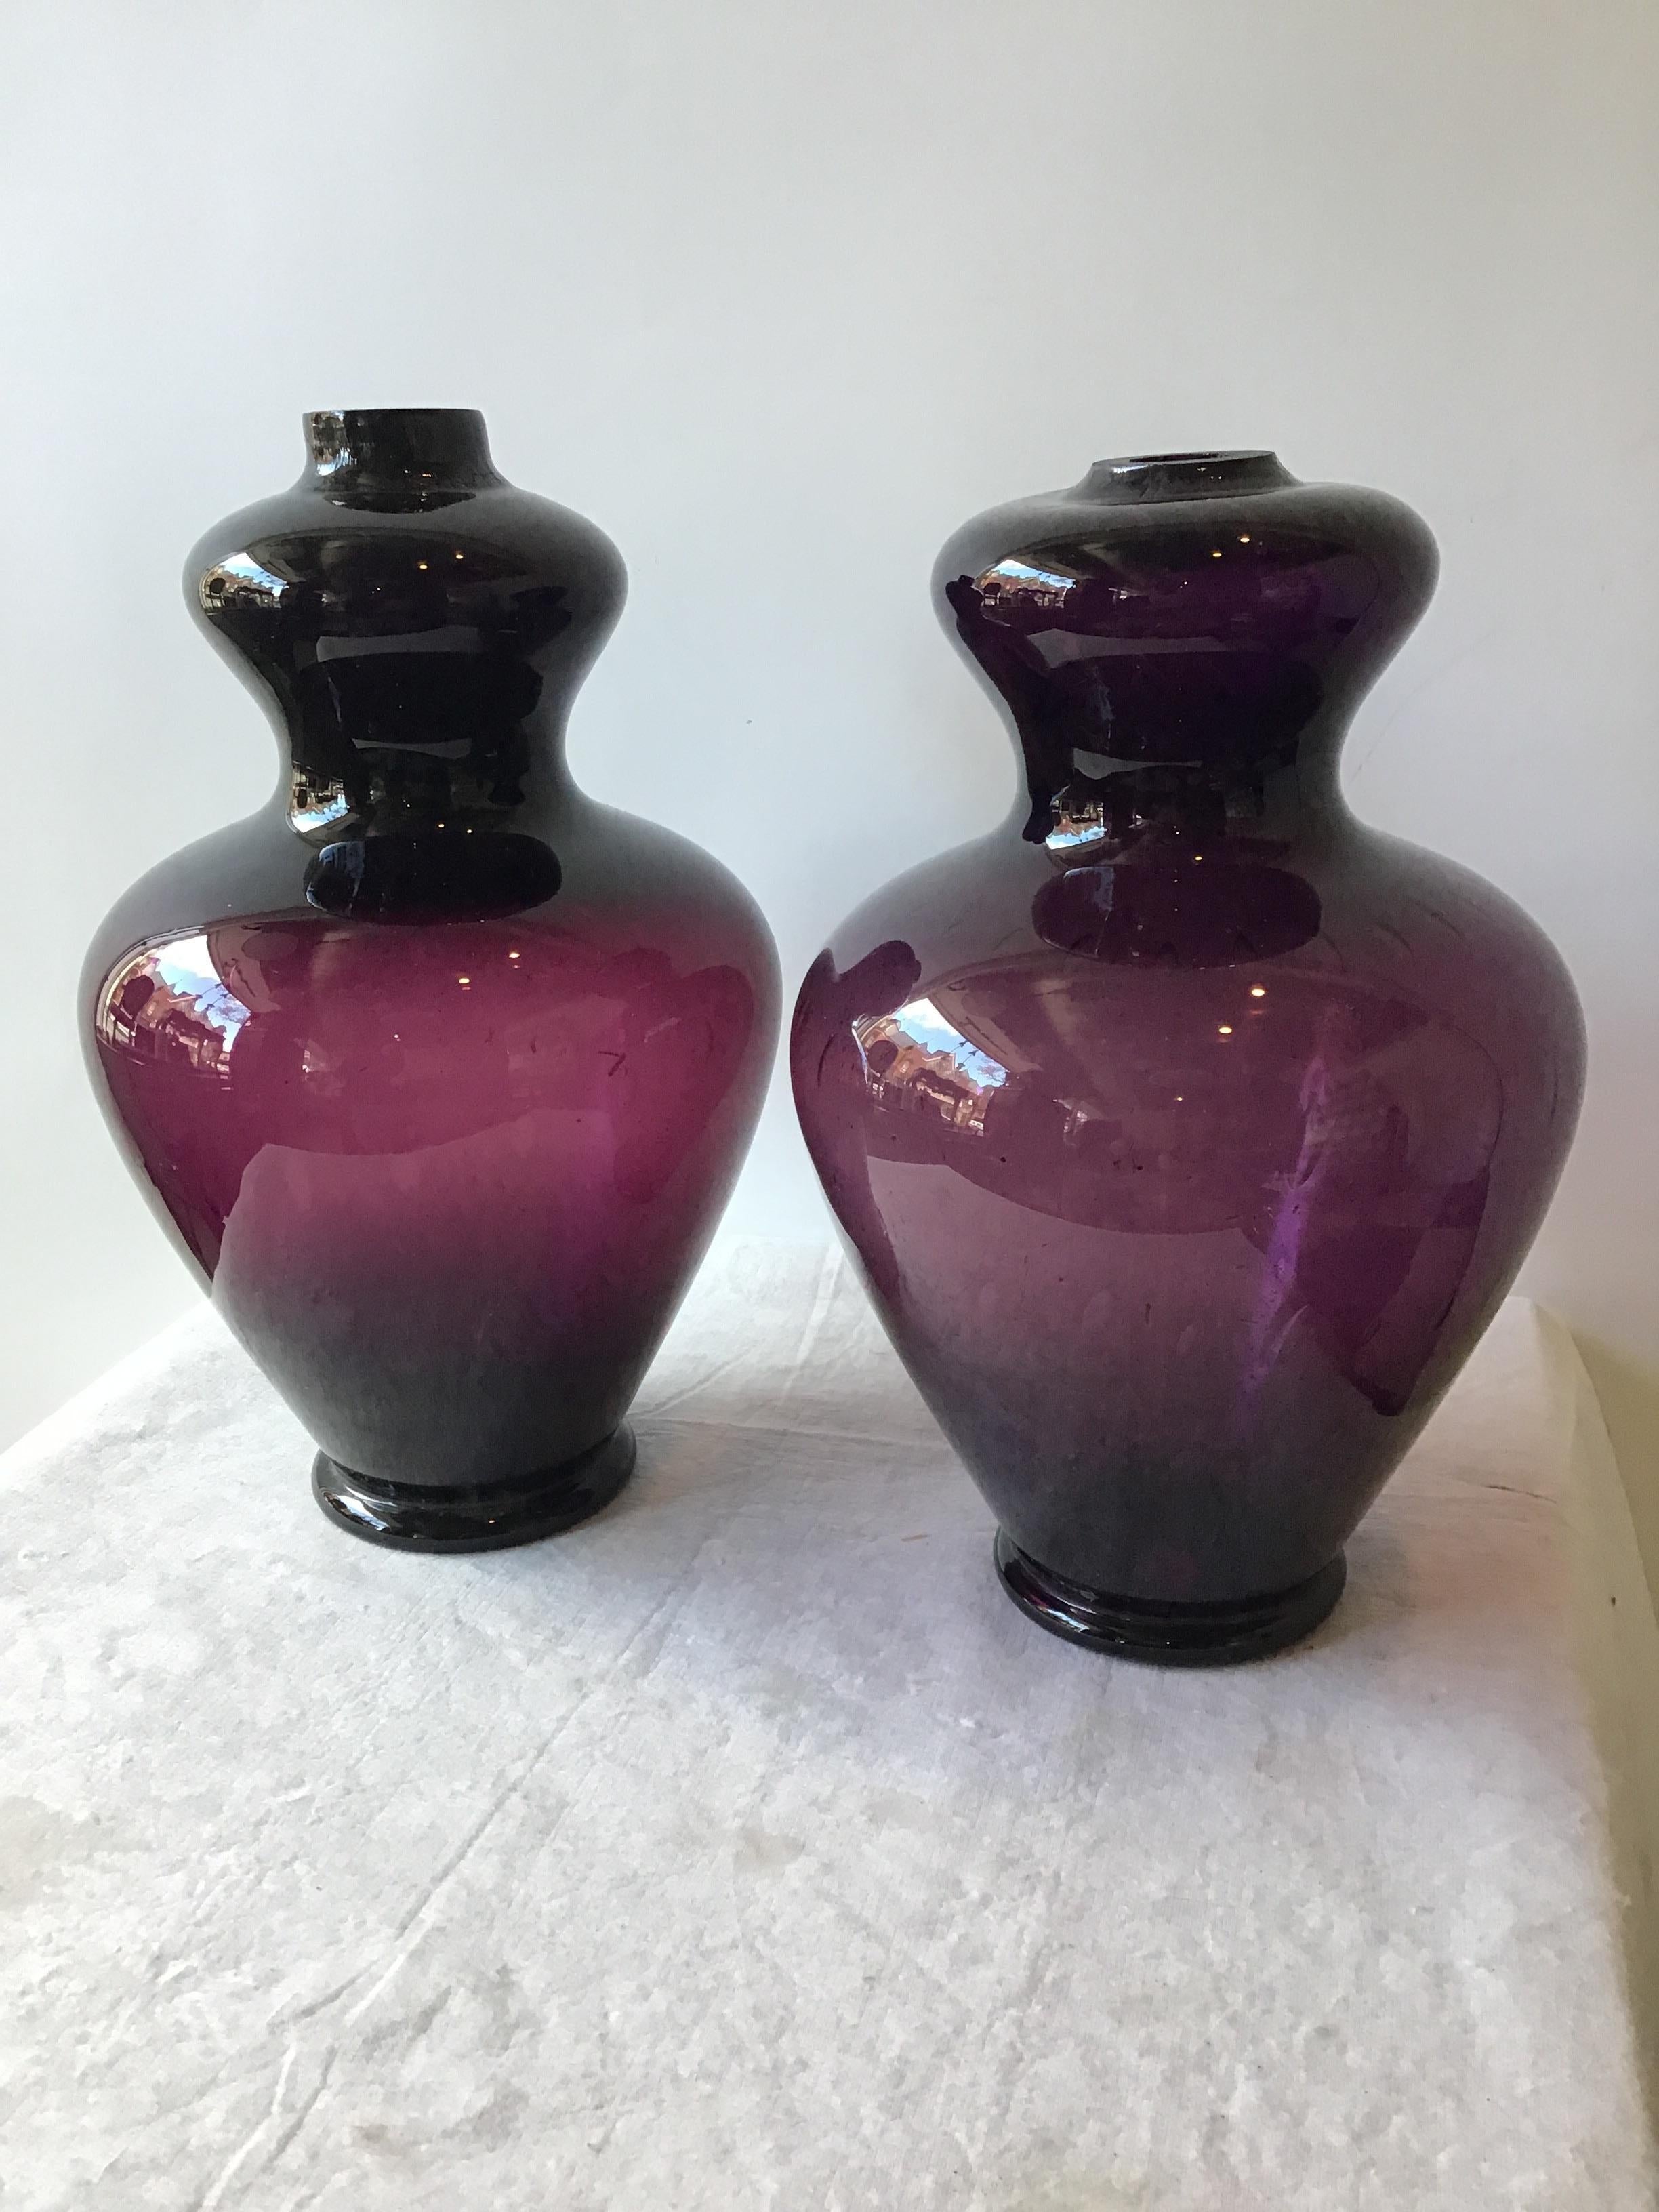 Pair of 1960s wine colored Murano lamp bodies by Balboa.
These lamp bodies need all parts in order to be turned into functioning lights.